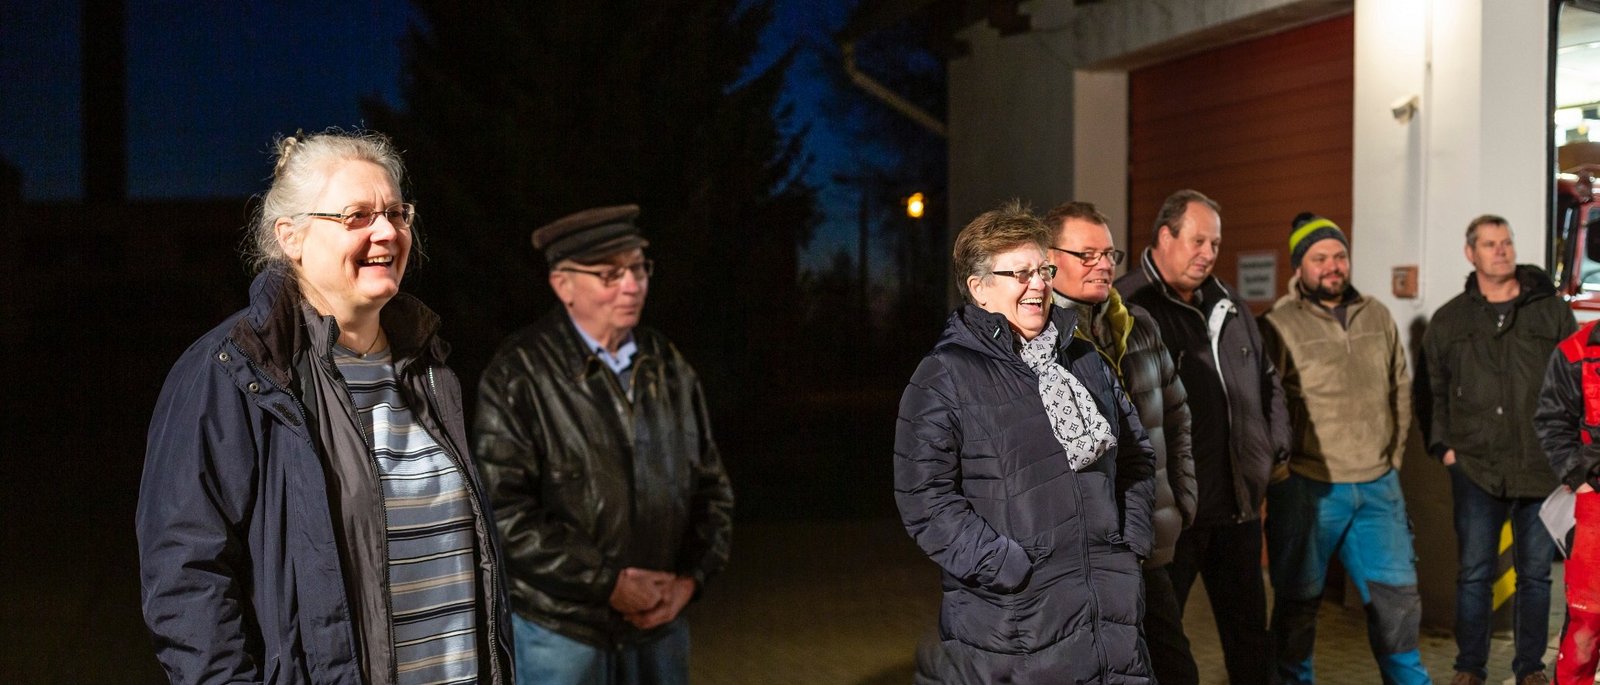 Members of The New Patrons of Züsedom standing at a meeting